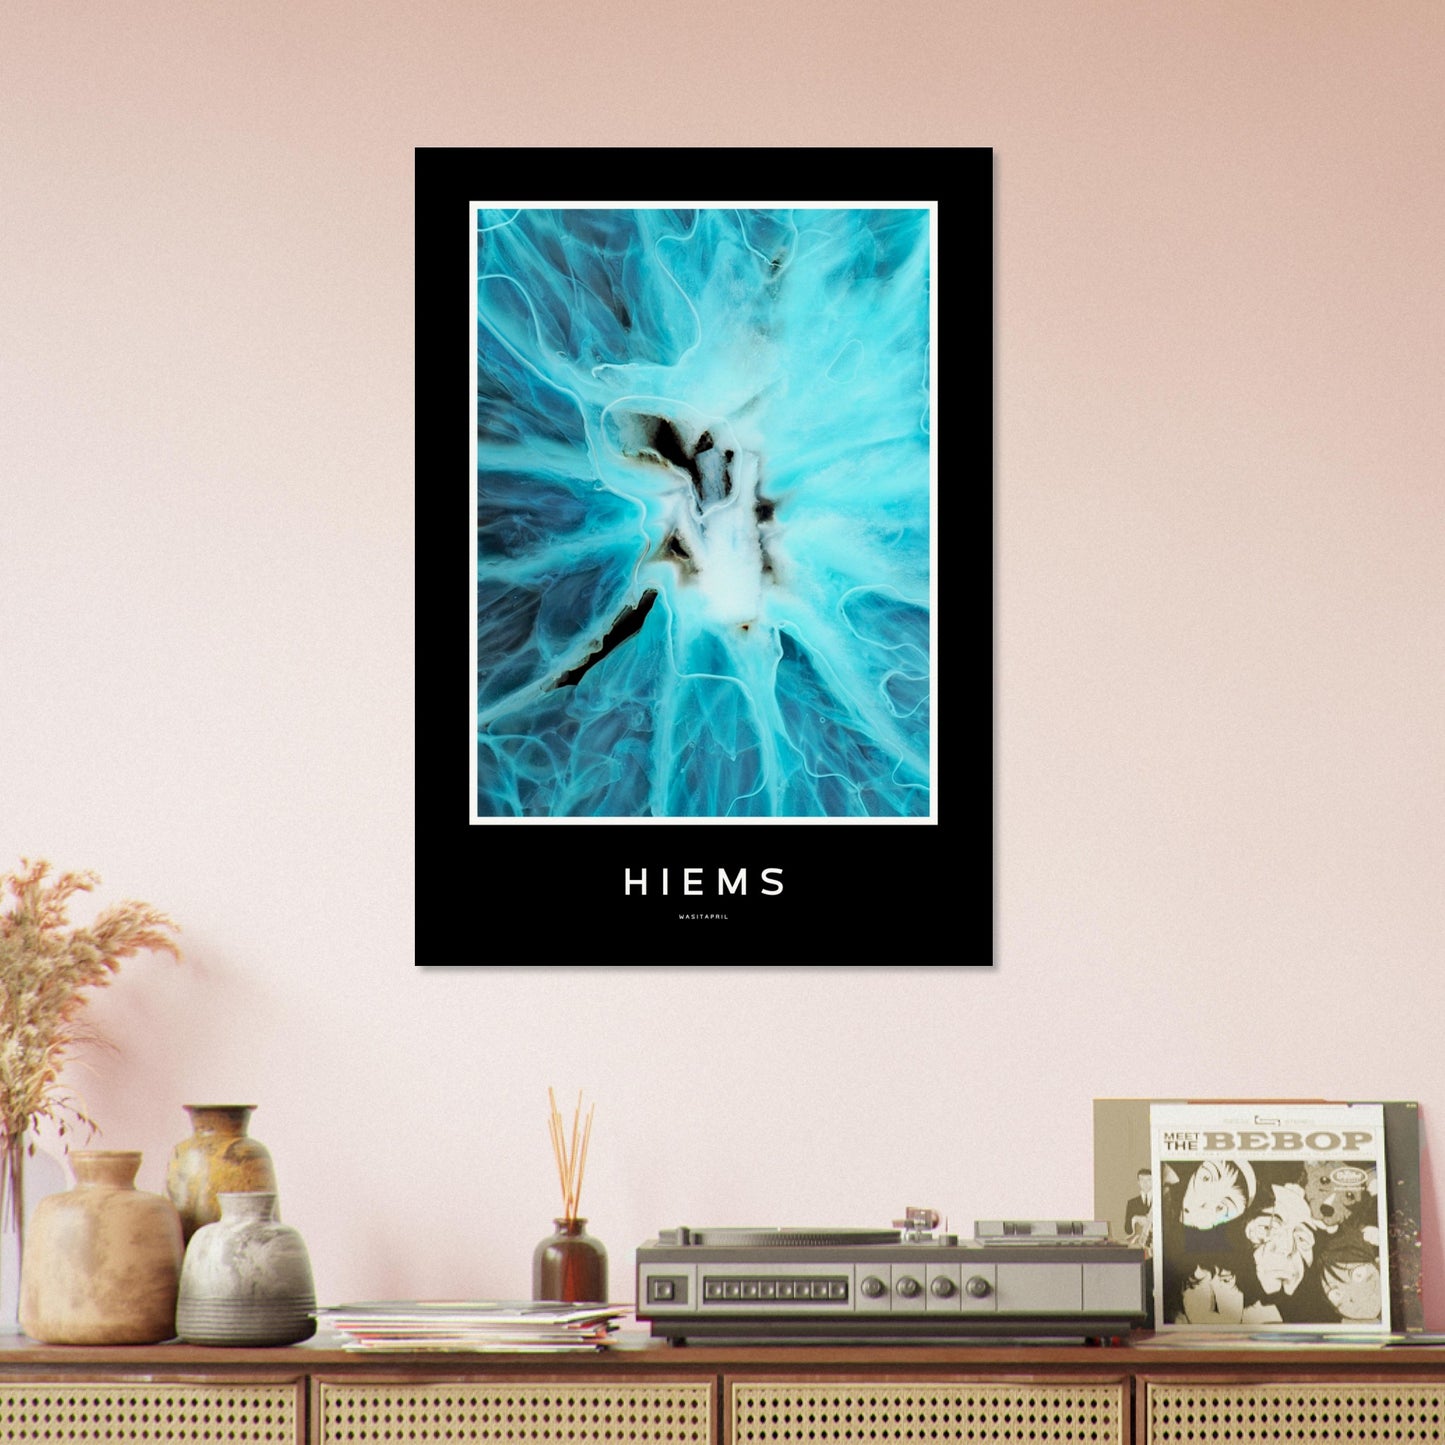 [HIEMS - black edition] | Museum-Quality Poster